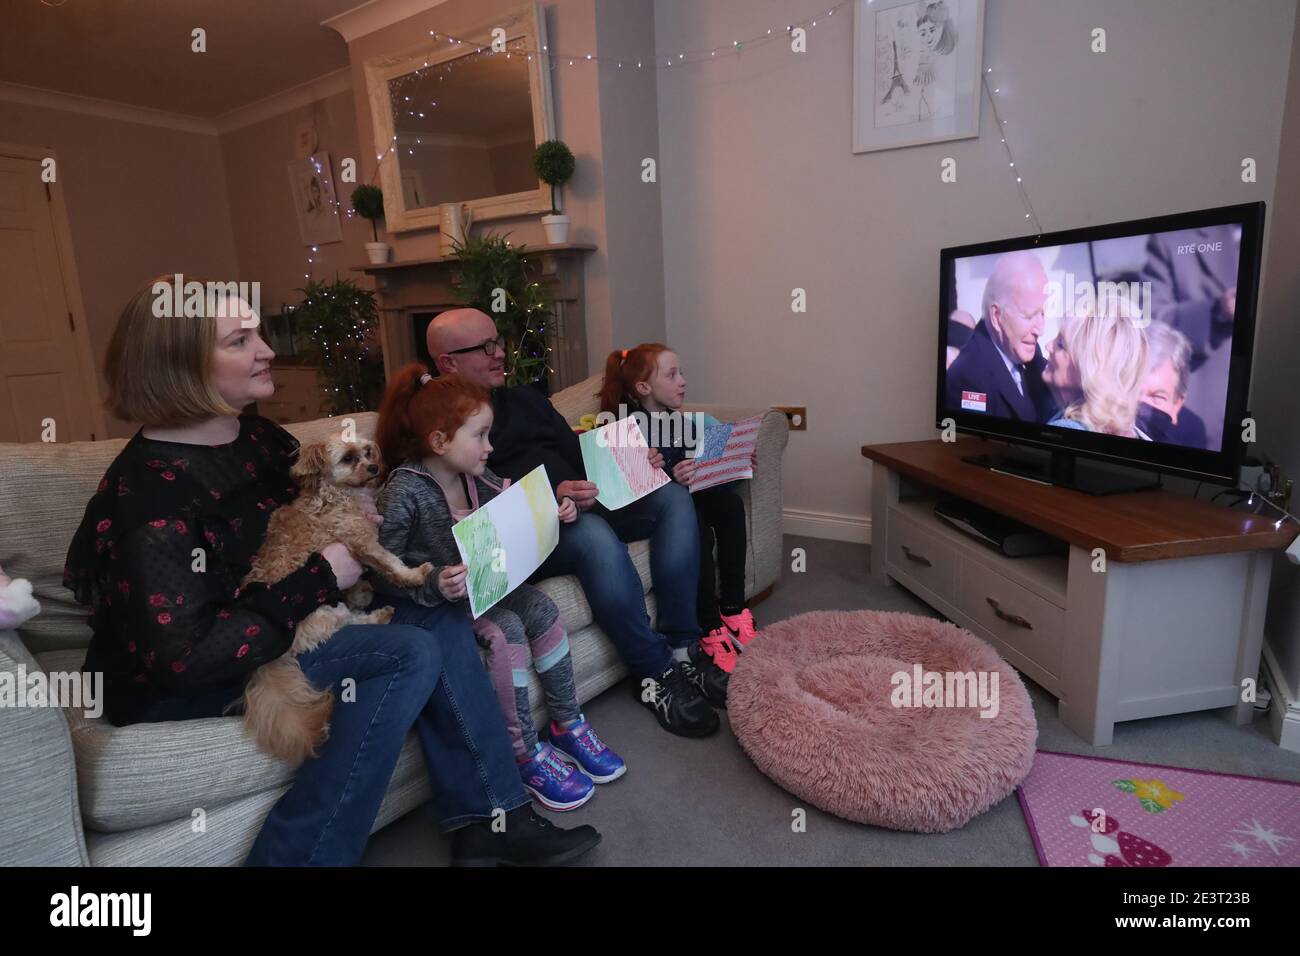 Susan McDonagh and her partner Peter Durcan with their children Maia, 8, and Harlow, 7, and their dog Cookie, watching the inauguration of Joe Biden as the 46th President of the United States. President elect Biden has ancestral links to the area on the West coast of Ireland as well as on the Cooley Peninsula in Co. Louth, on the East coast. Stock Photo